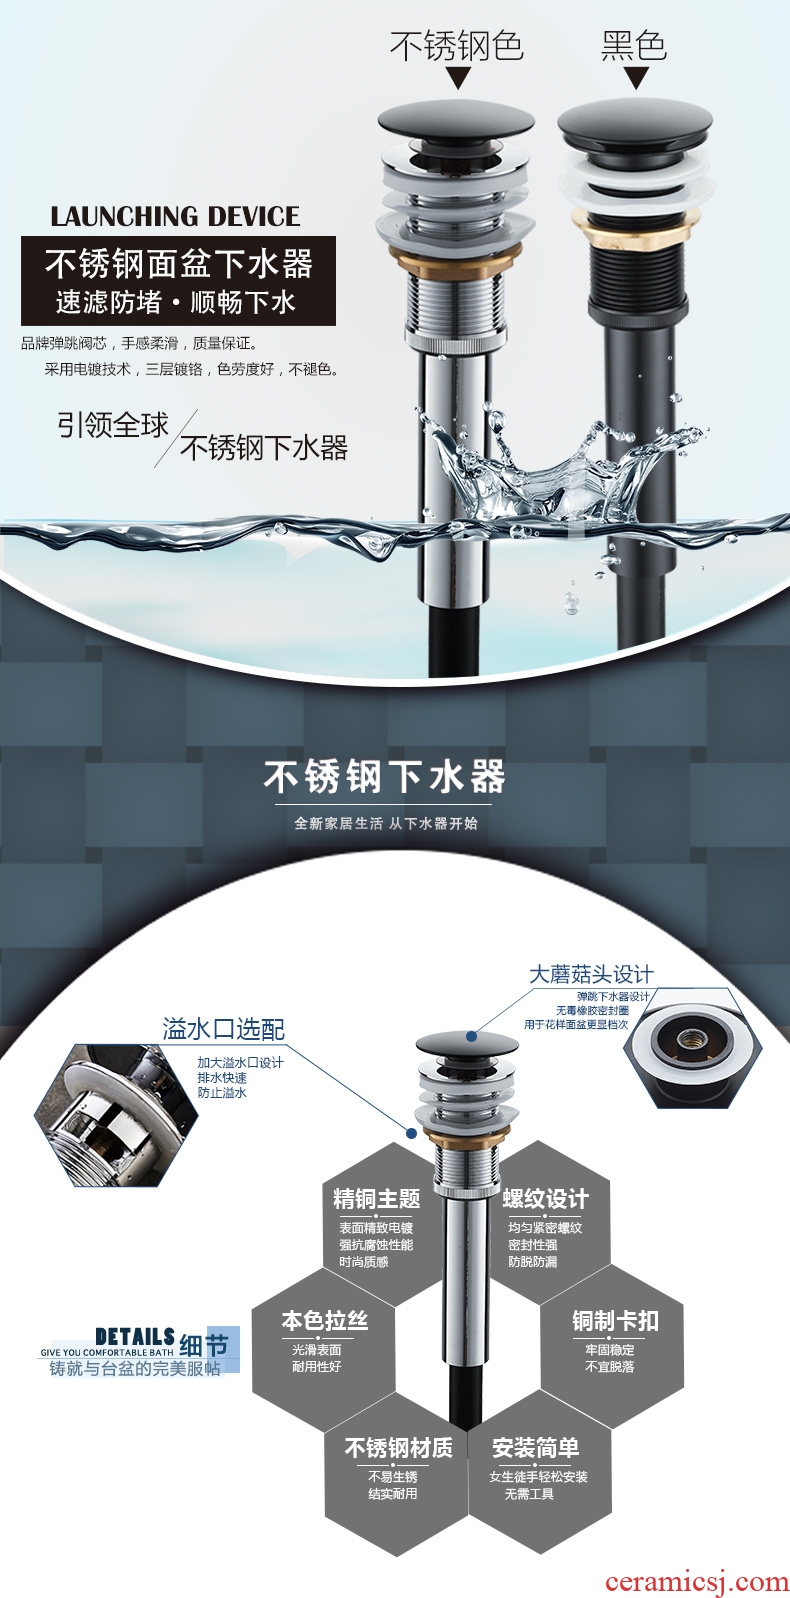 Koh larn, qi stainless steel basin water drainage ceramic bowl lavatory sink drainer jumping into the water